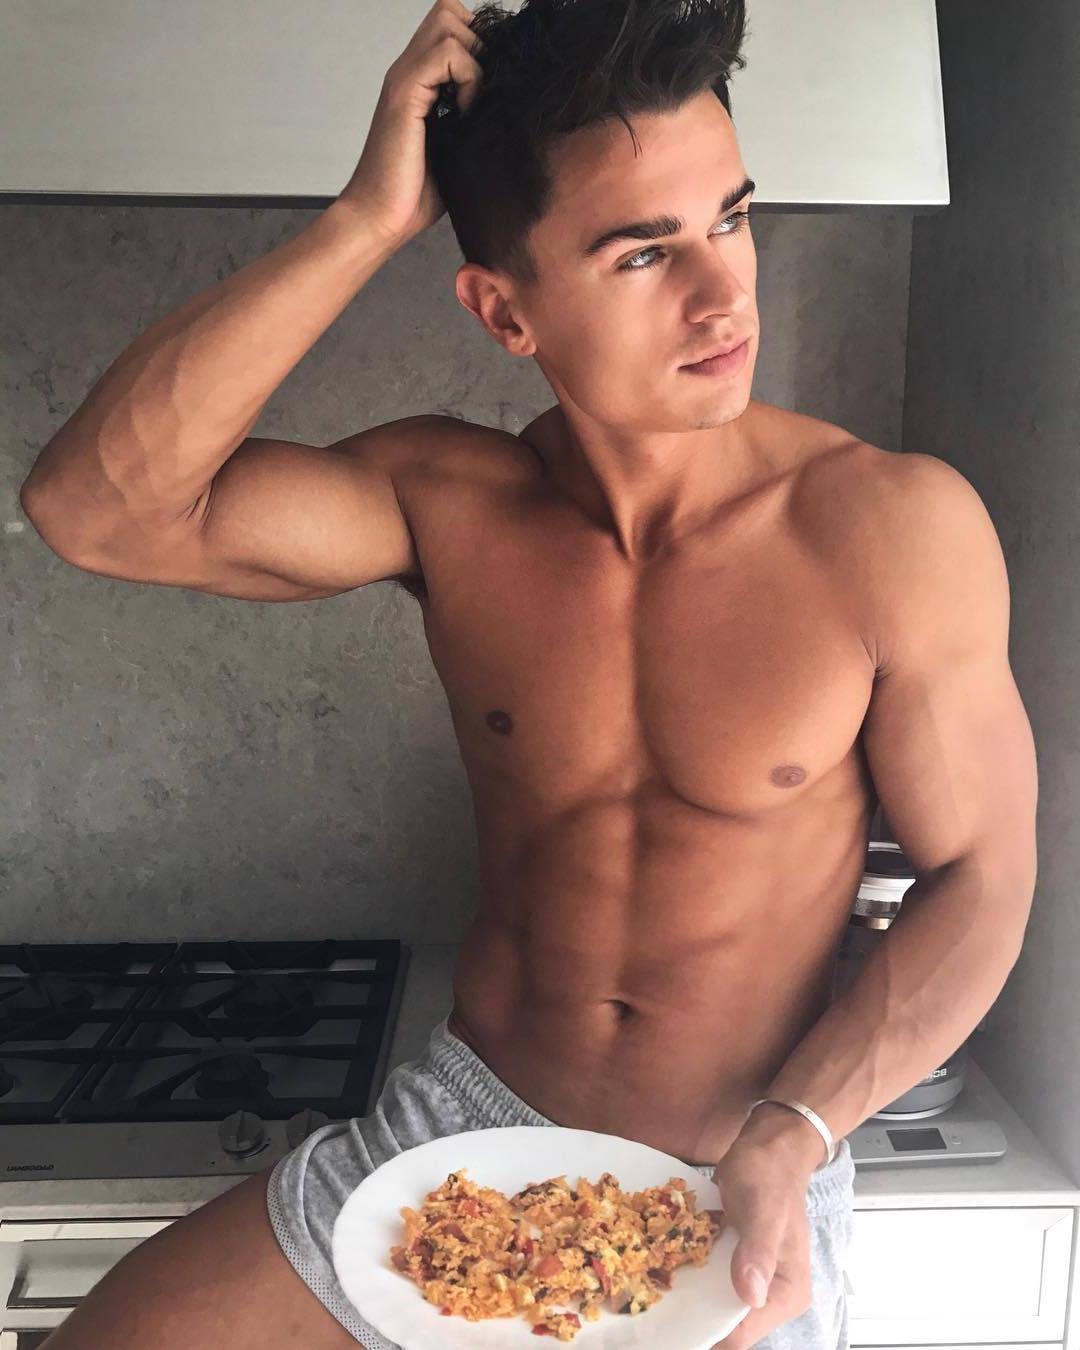 hot-shirtless-fit-male-models-gay-twink-bottom-food-plate-breakfast